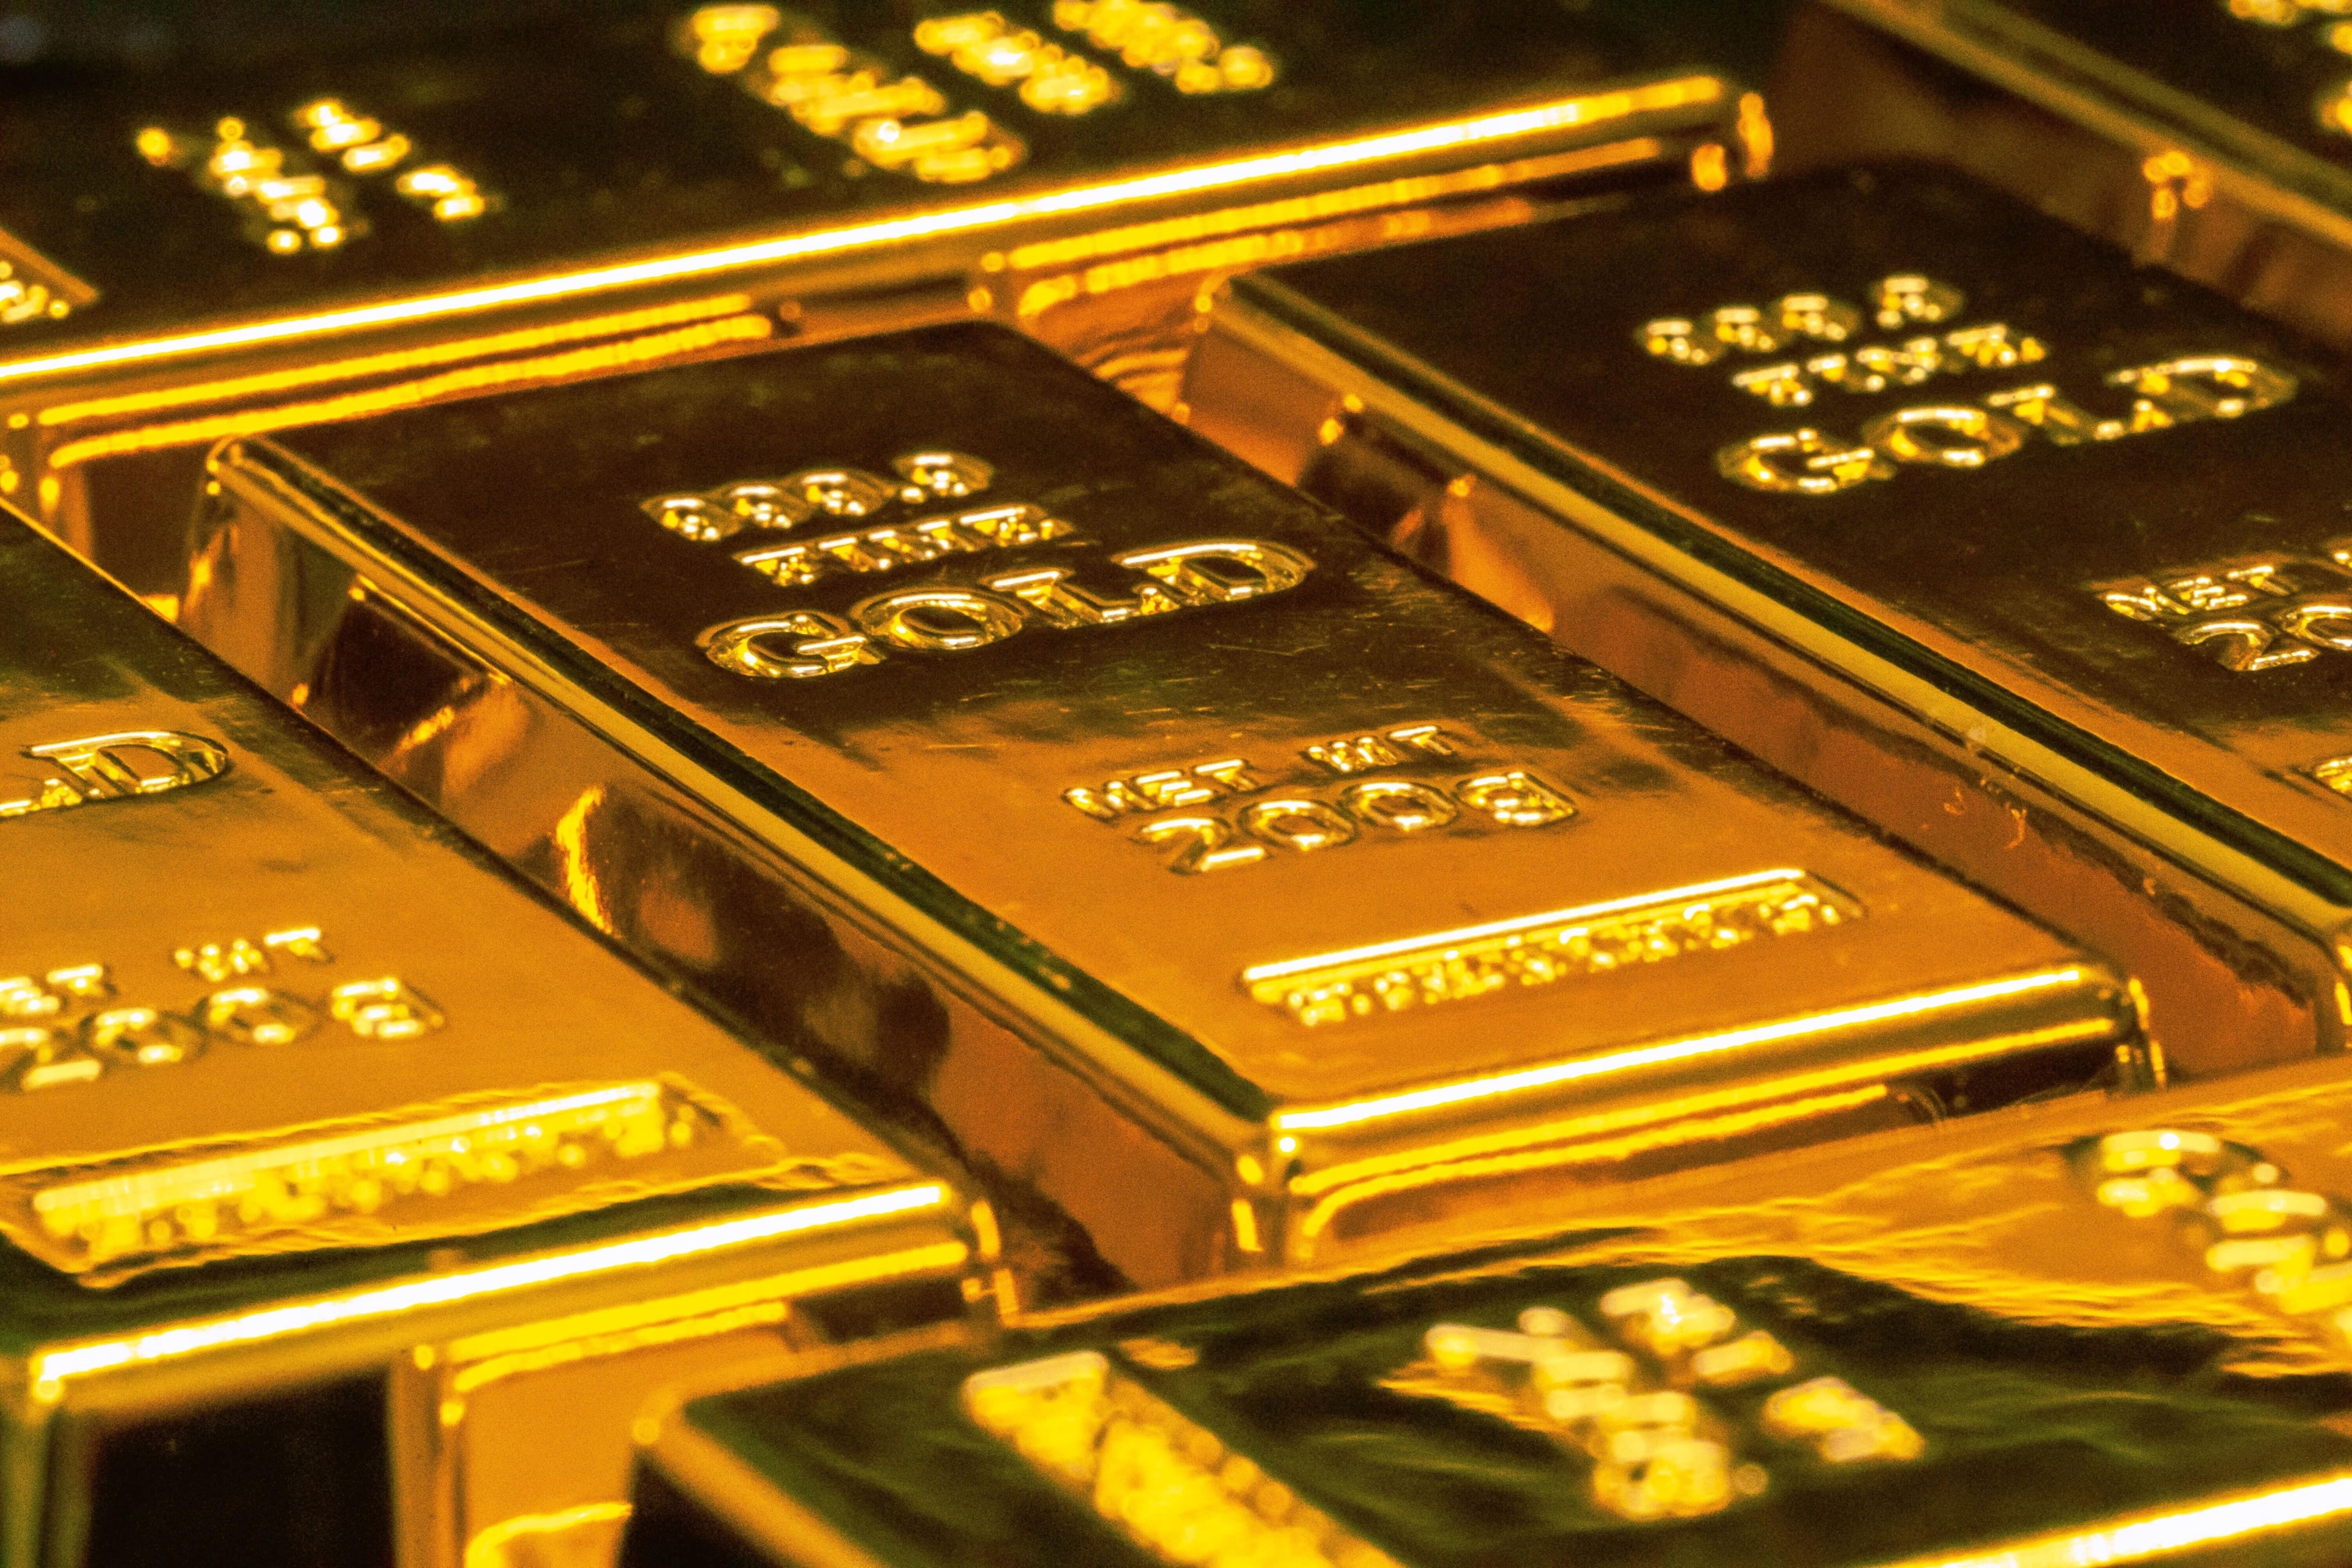 Gold rose to more than $2,000 in Asian trade on Monday morning as investors fled to the safe-haven commodity over fears about the impact of the Ukraine war on the global economy. The precious metal hit a peak of $2,000.86 an ounce, its highest level since September 2020.